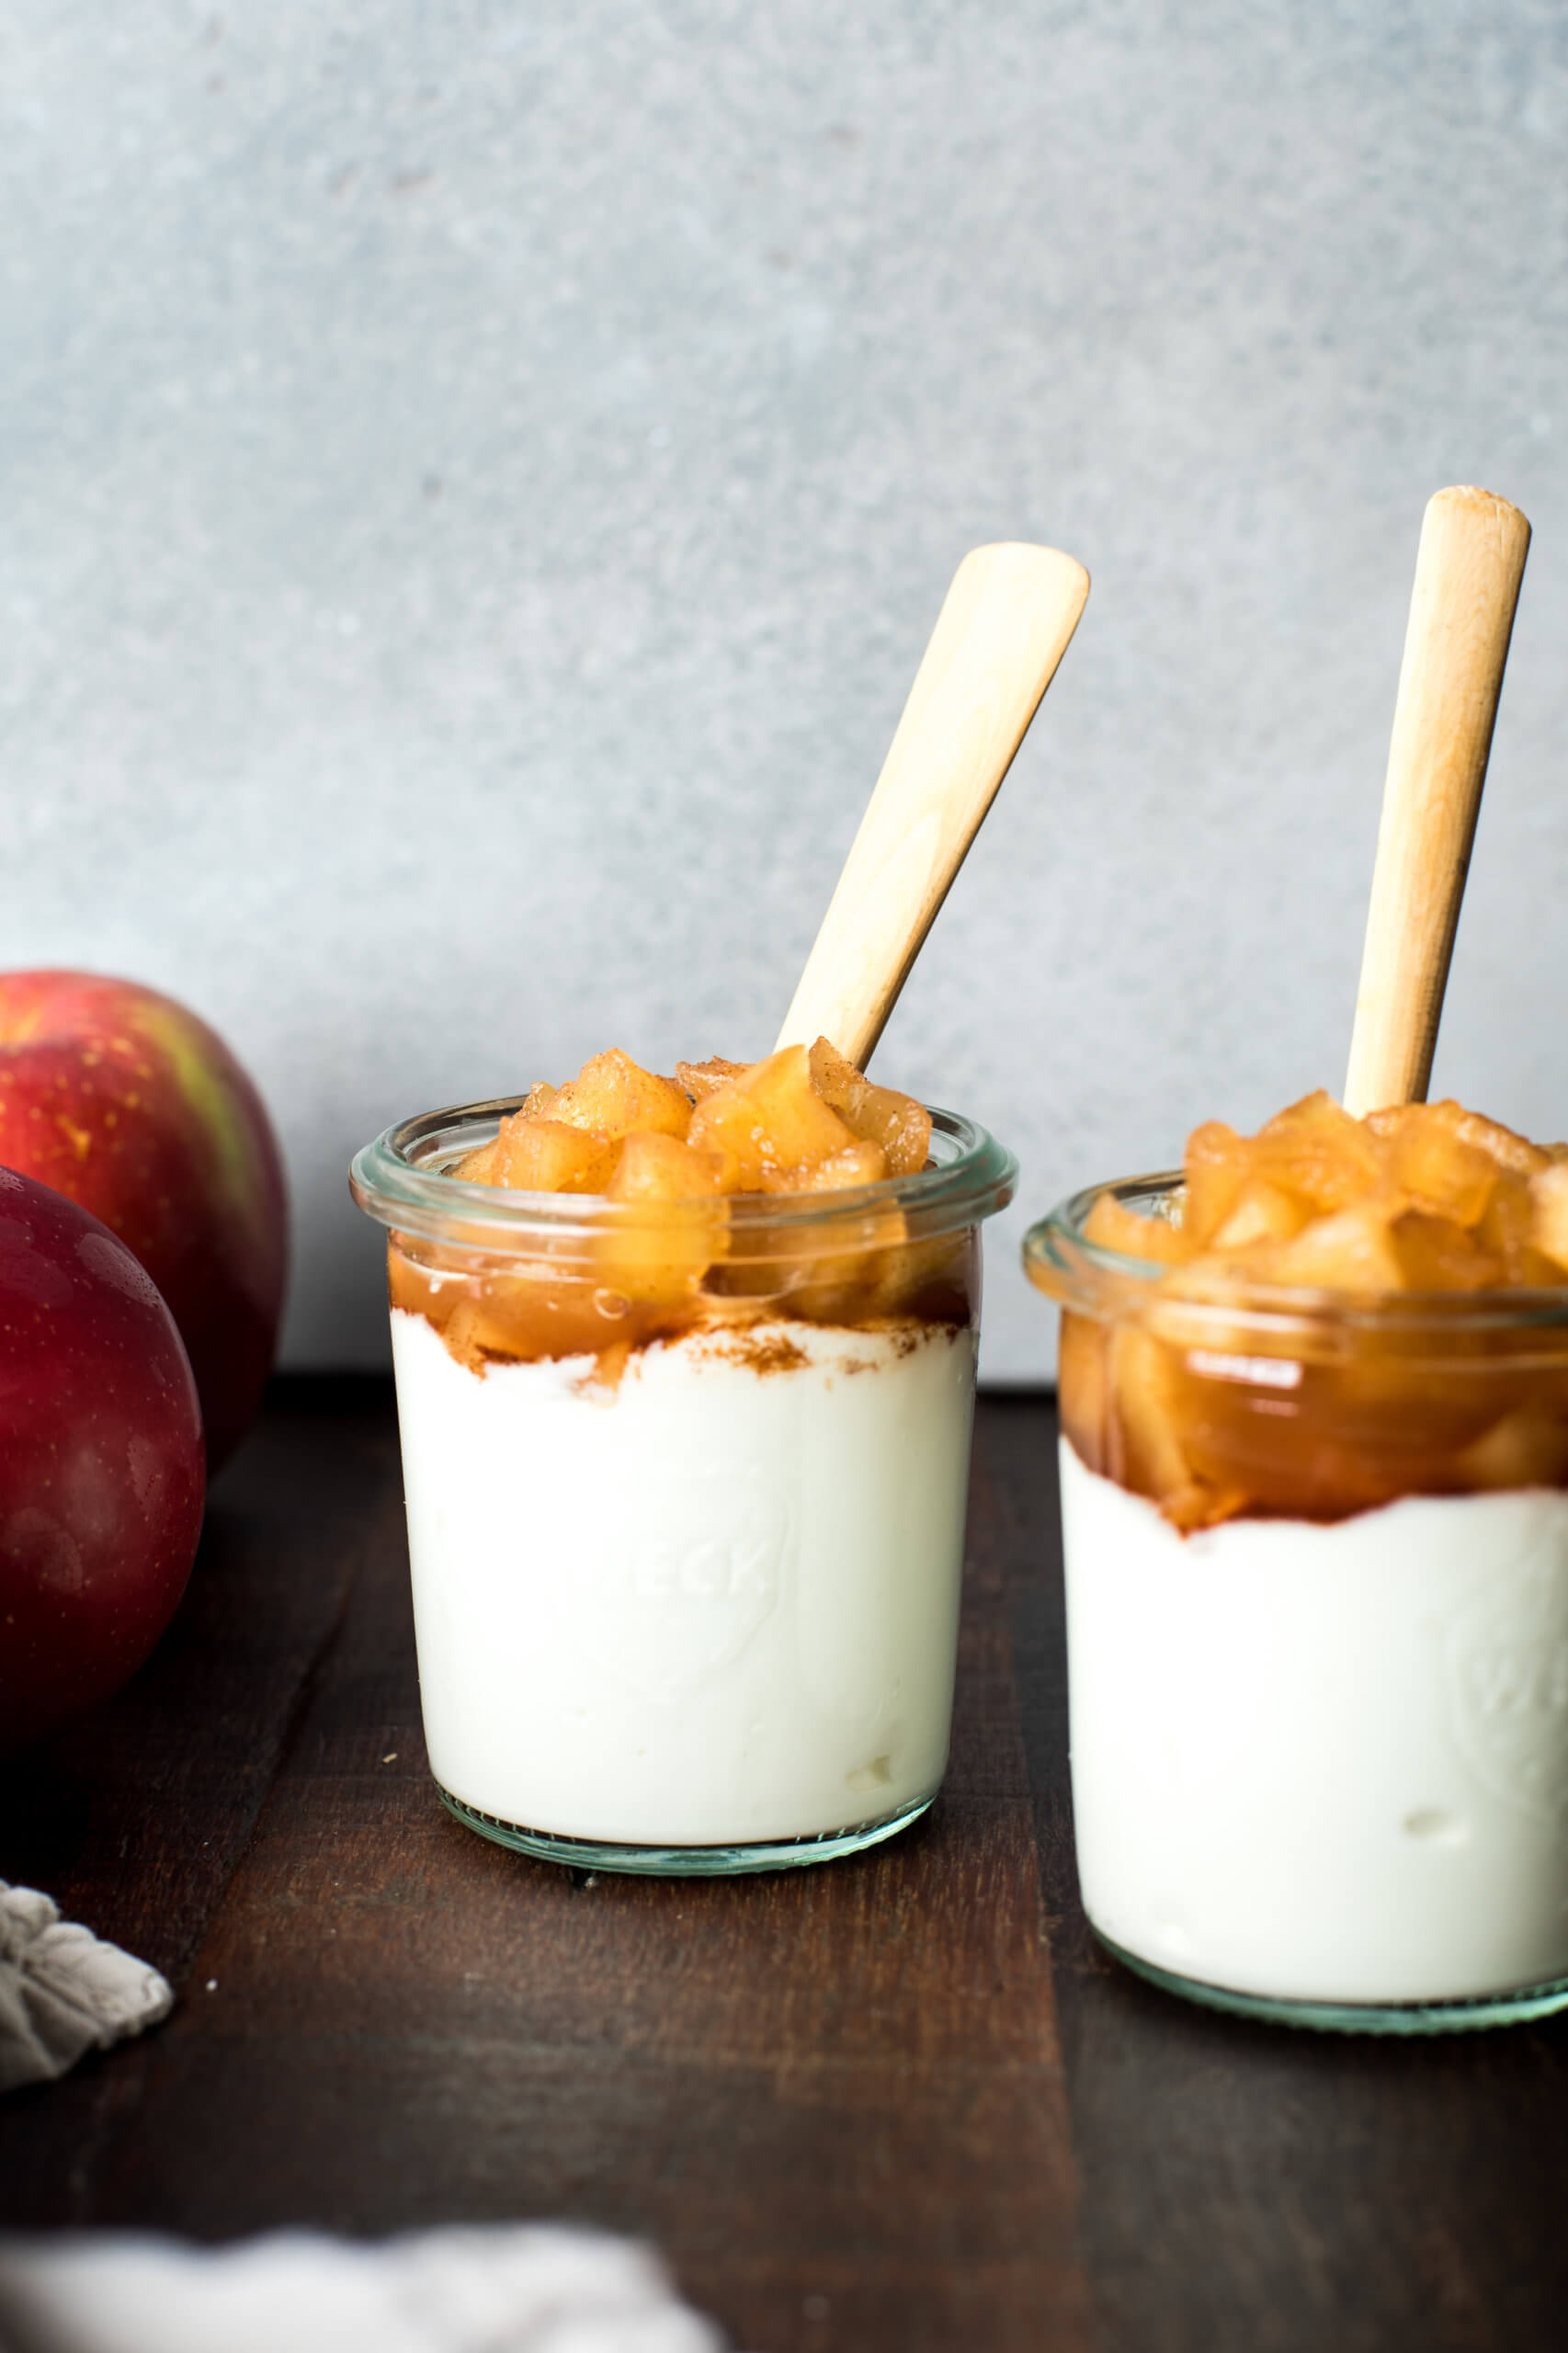 Yogurt parfaits with cinnamon apples on top, displays in a cup with spoons.